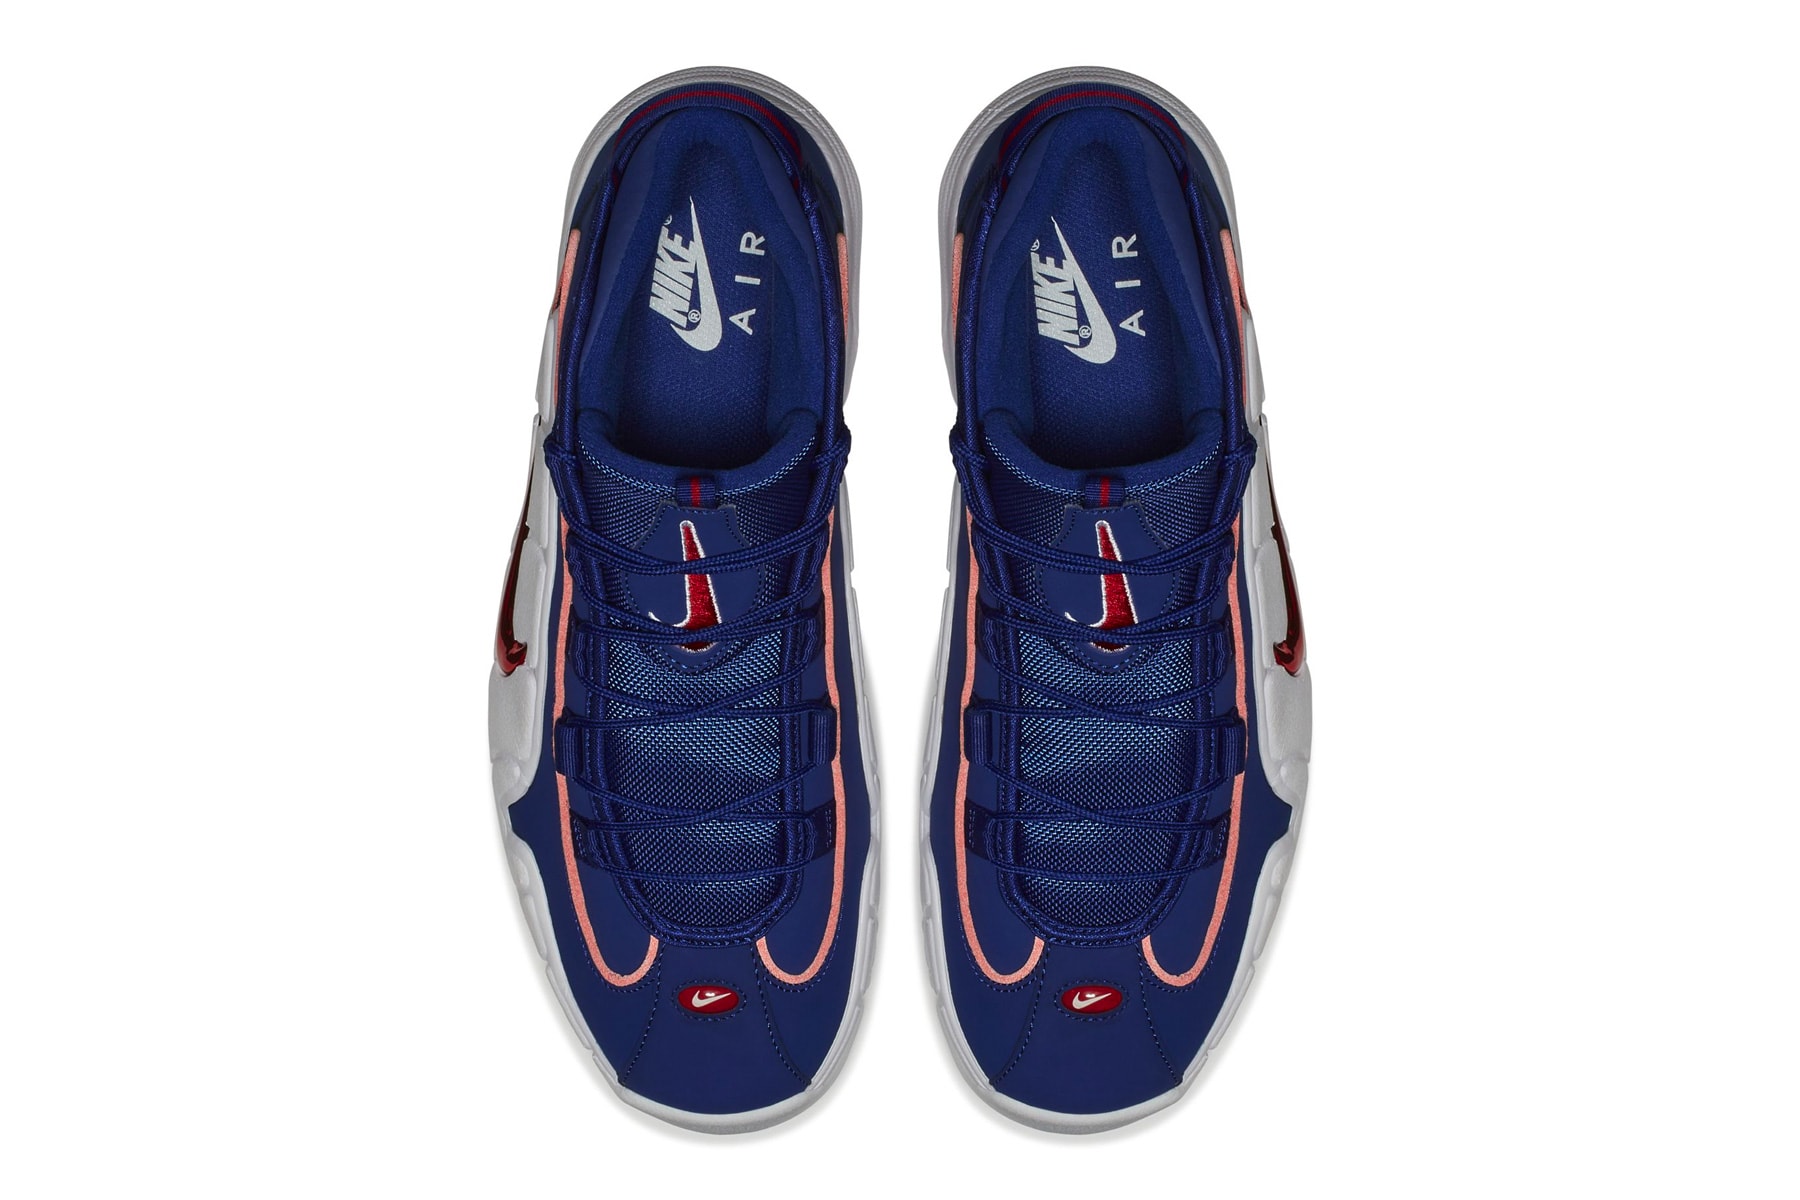 Nike Air Max Penny "Royal Blue/Gym Red" release date first look retro sneakers